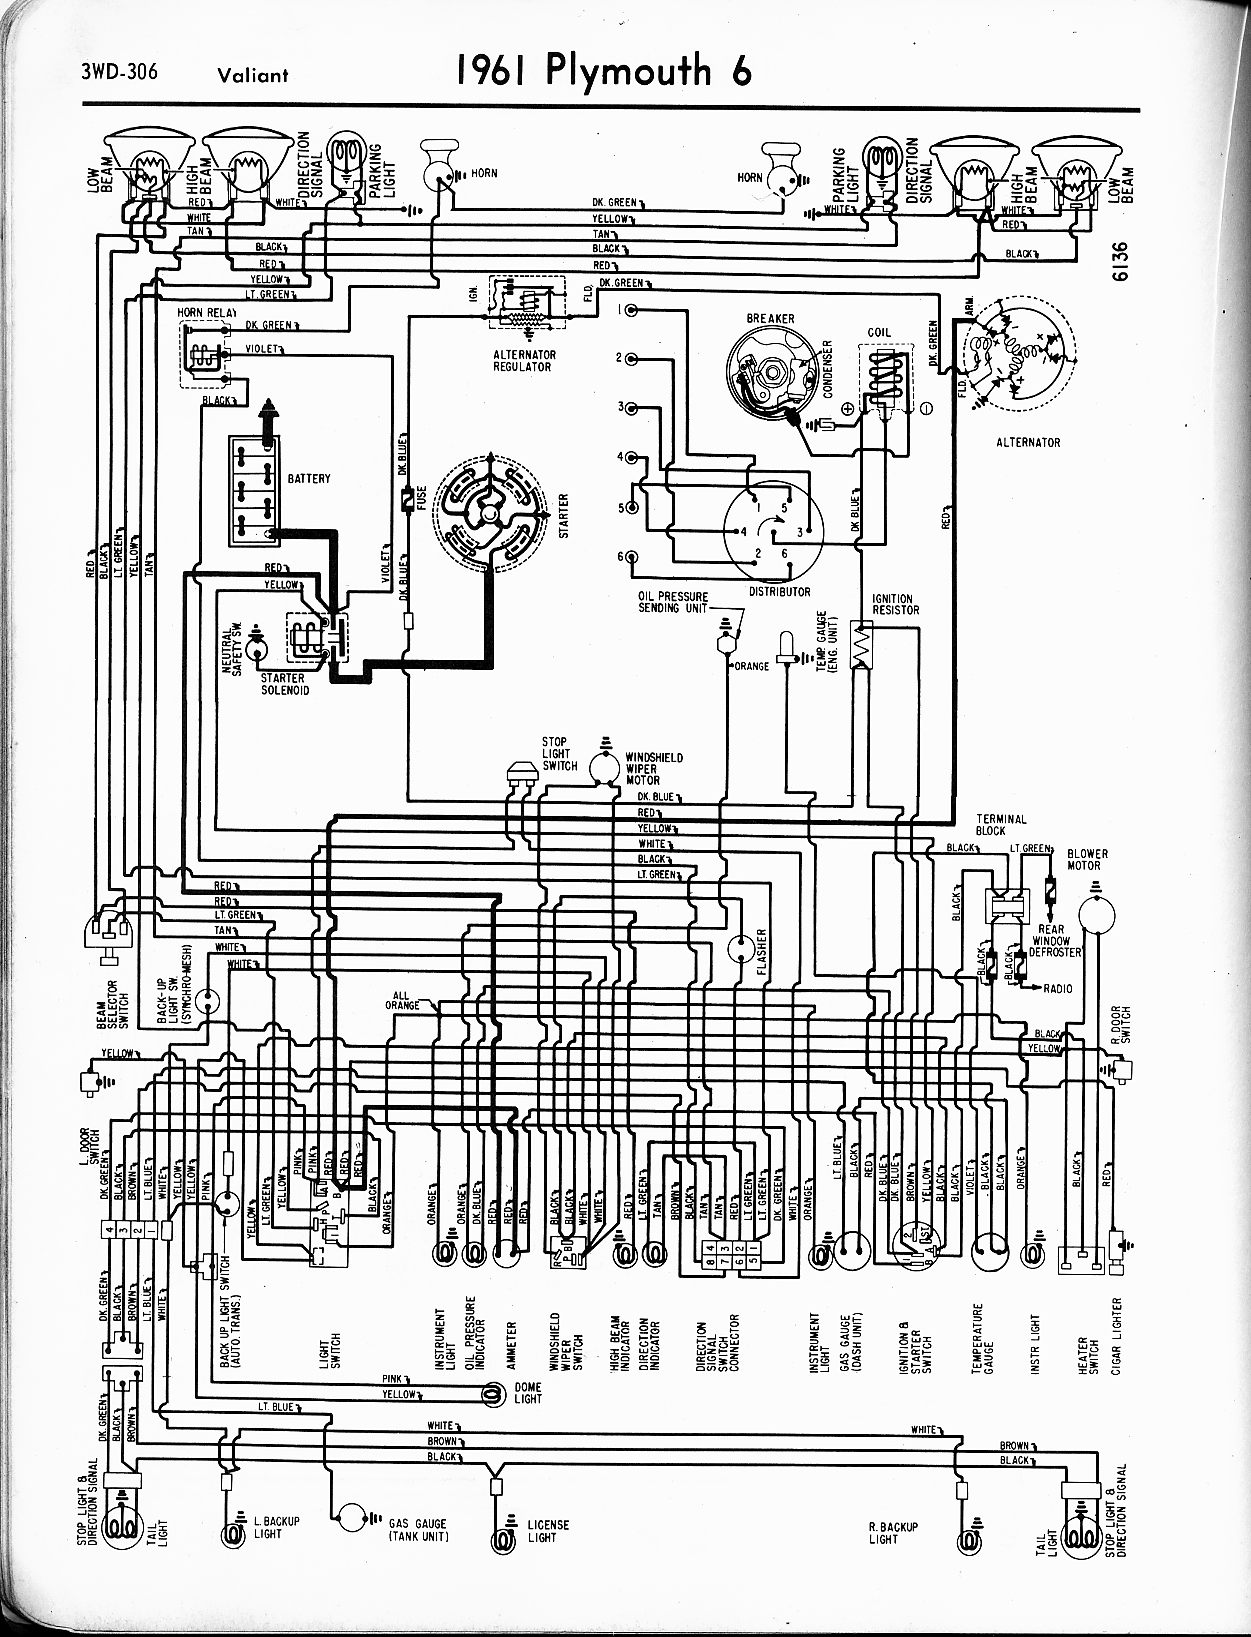 1973 Dodge Challenger Wiring Harness from www.oldcarmanualproject.com